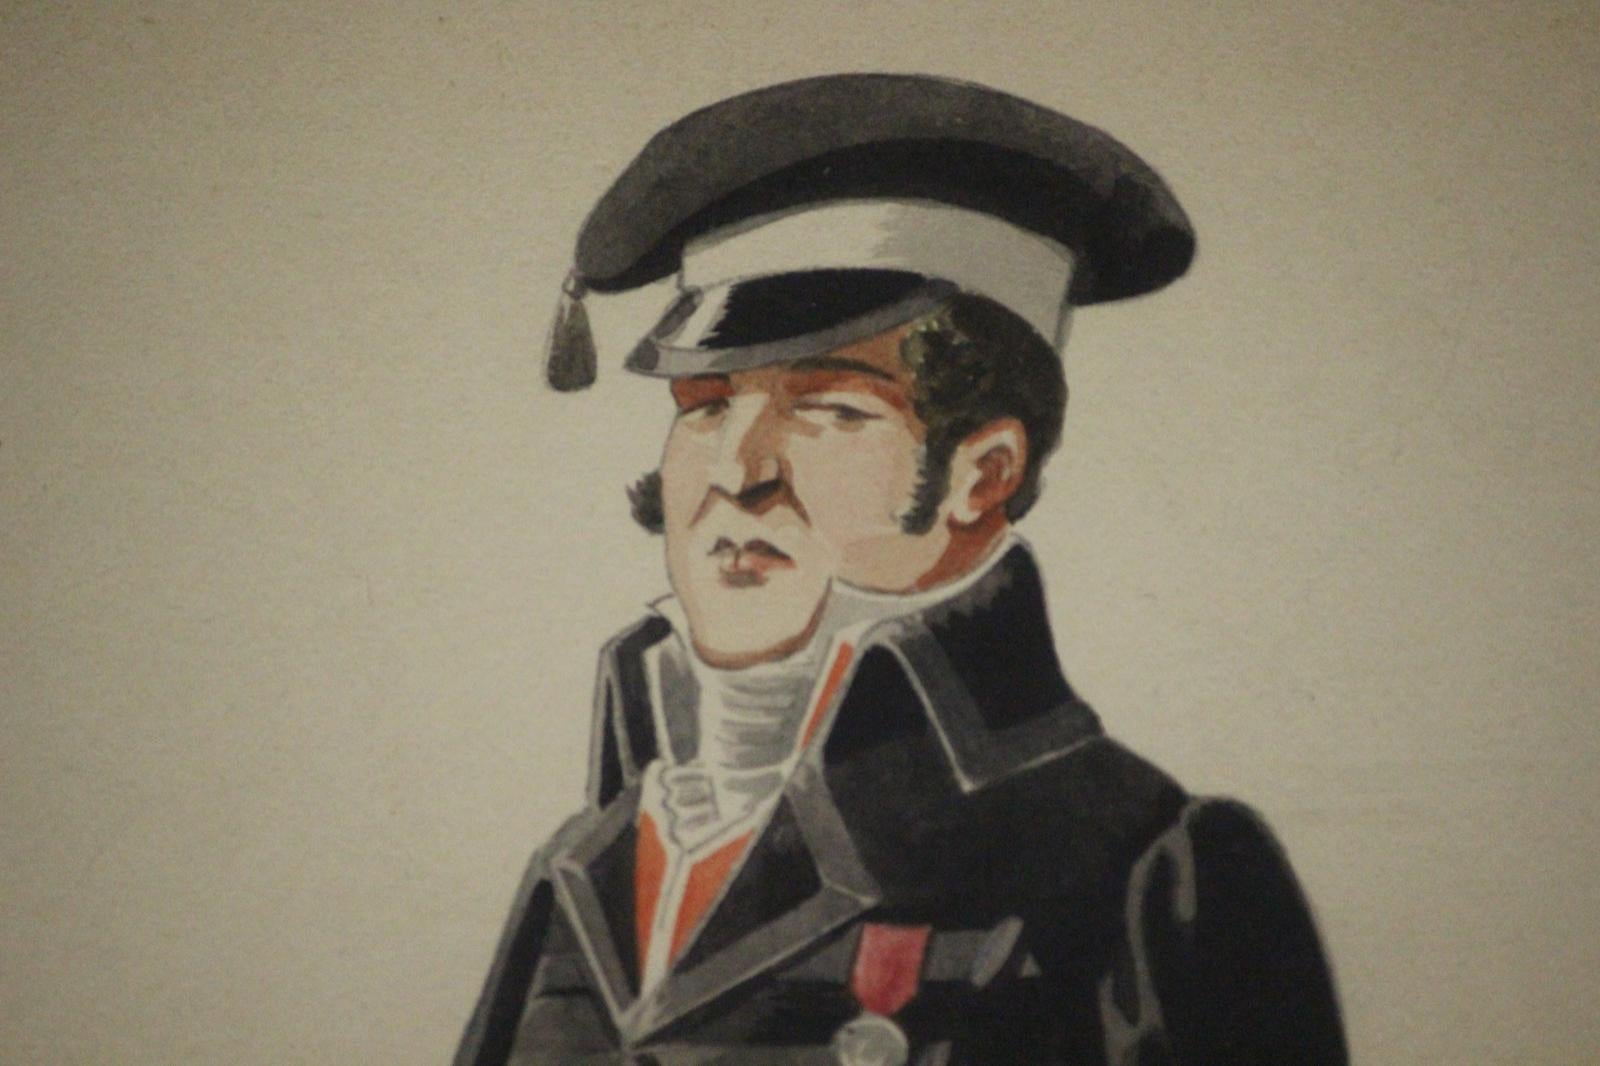 Watercolour depicting Sir Despard in elegant military attire

Rutland Barrington as Sir Despard (Act One) in the original DOC production of 